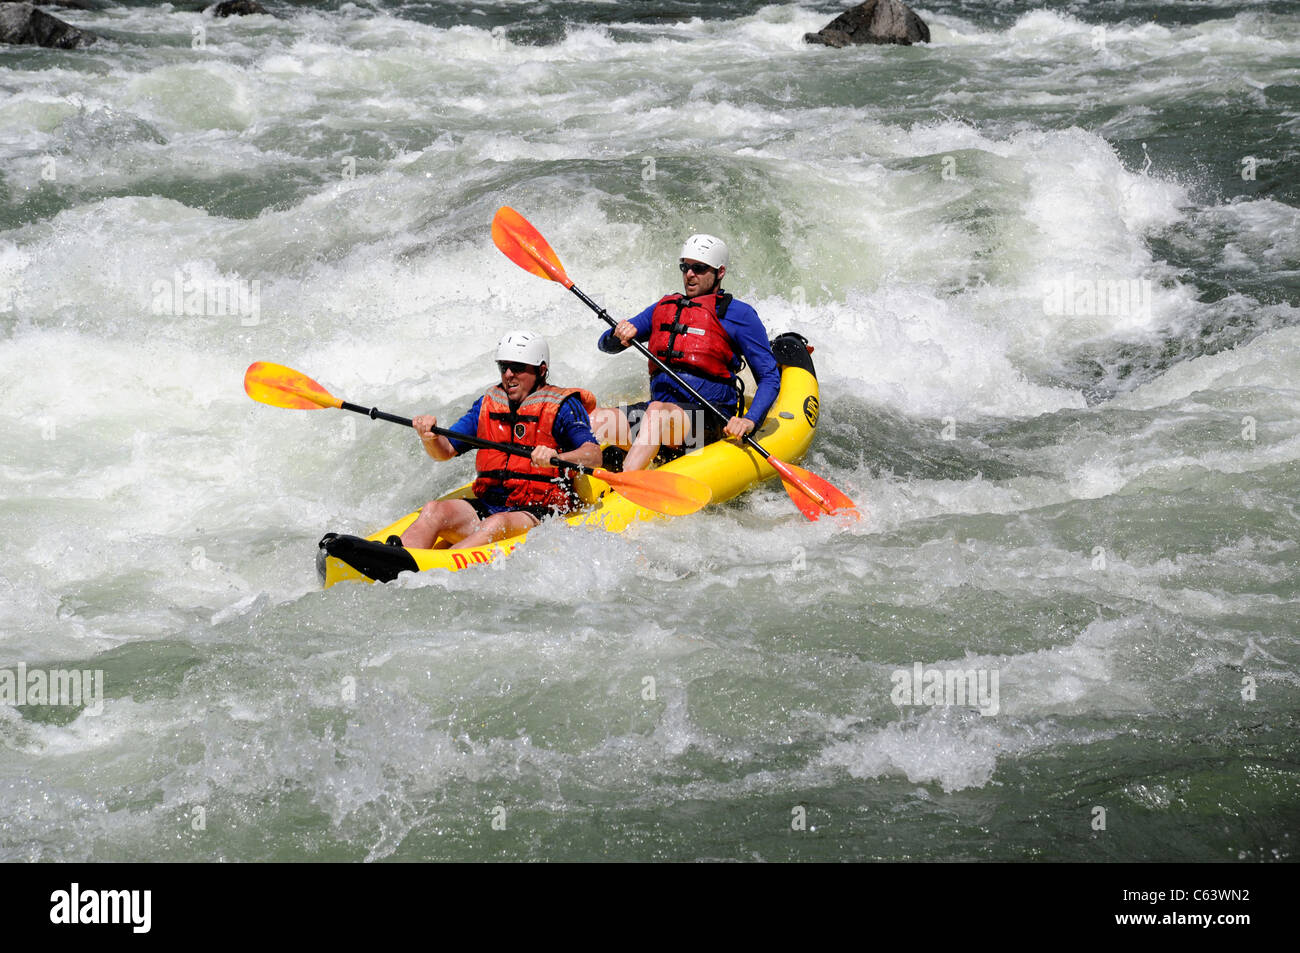 Two man inflatable kayak with O.A.R.S. in whitewater at Big Mallard Rapids on Main Salmon River in Idaho Stock Photo